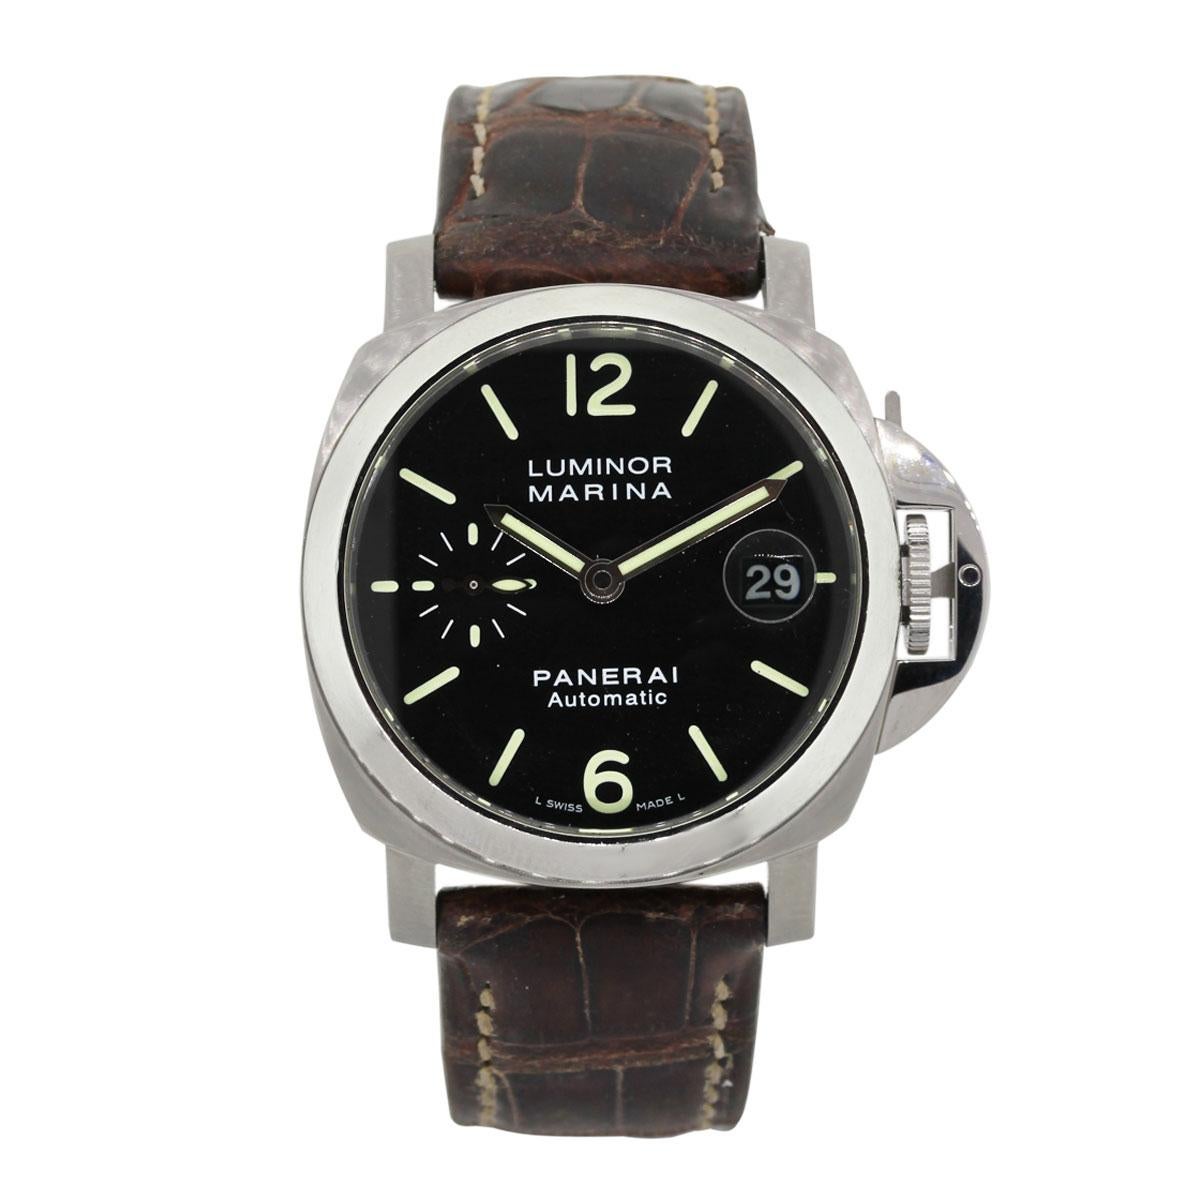 Brand: Panerai
MPN: PAM 104
Case Material: Stainless Steel
Case Diameter: 44mm
Crystal: Sapphire crystal
Bezel: Stainless steel
Dial: Black dial
Bracelet: Brown leather strap (factory)
Size: Will fit a 7.25″ wrist
Clasp: Brushed stainless steel